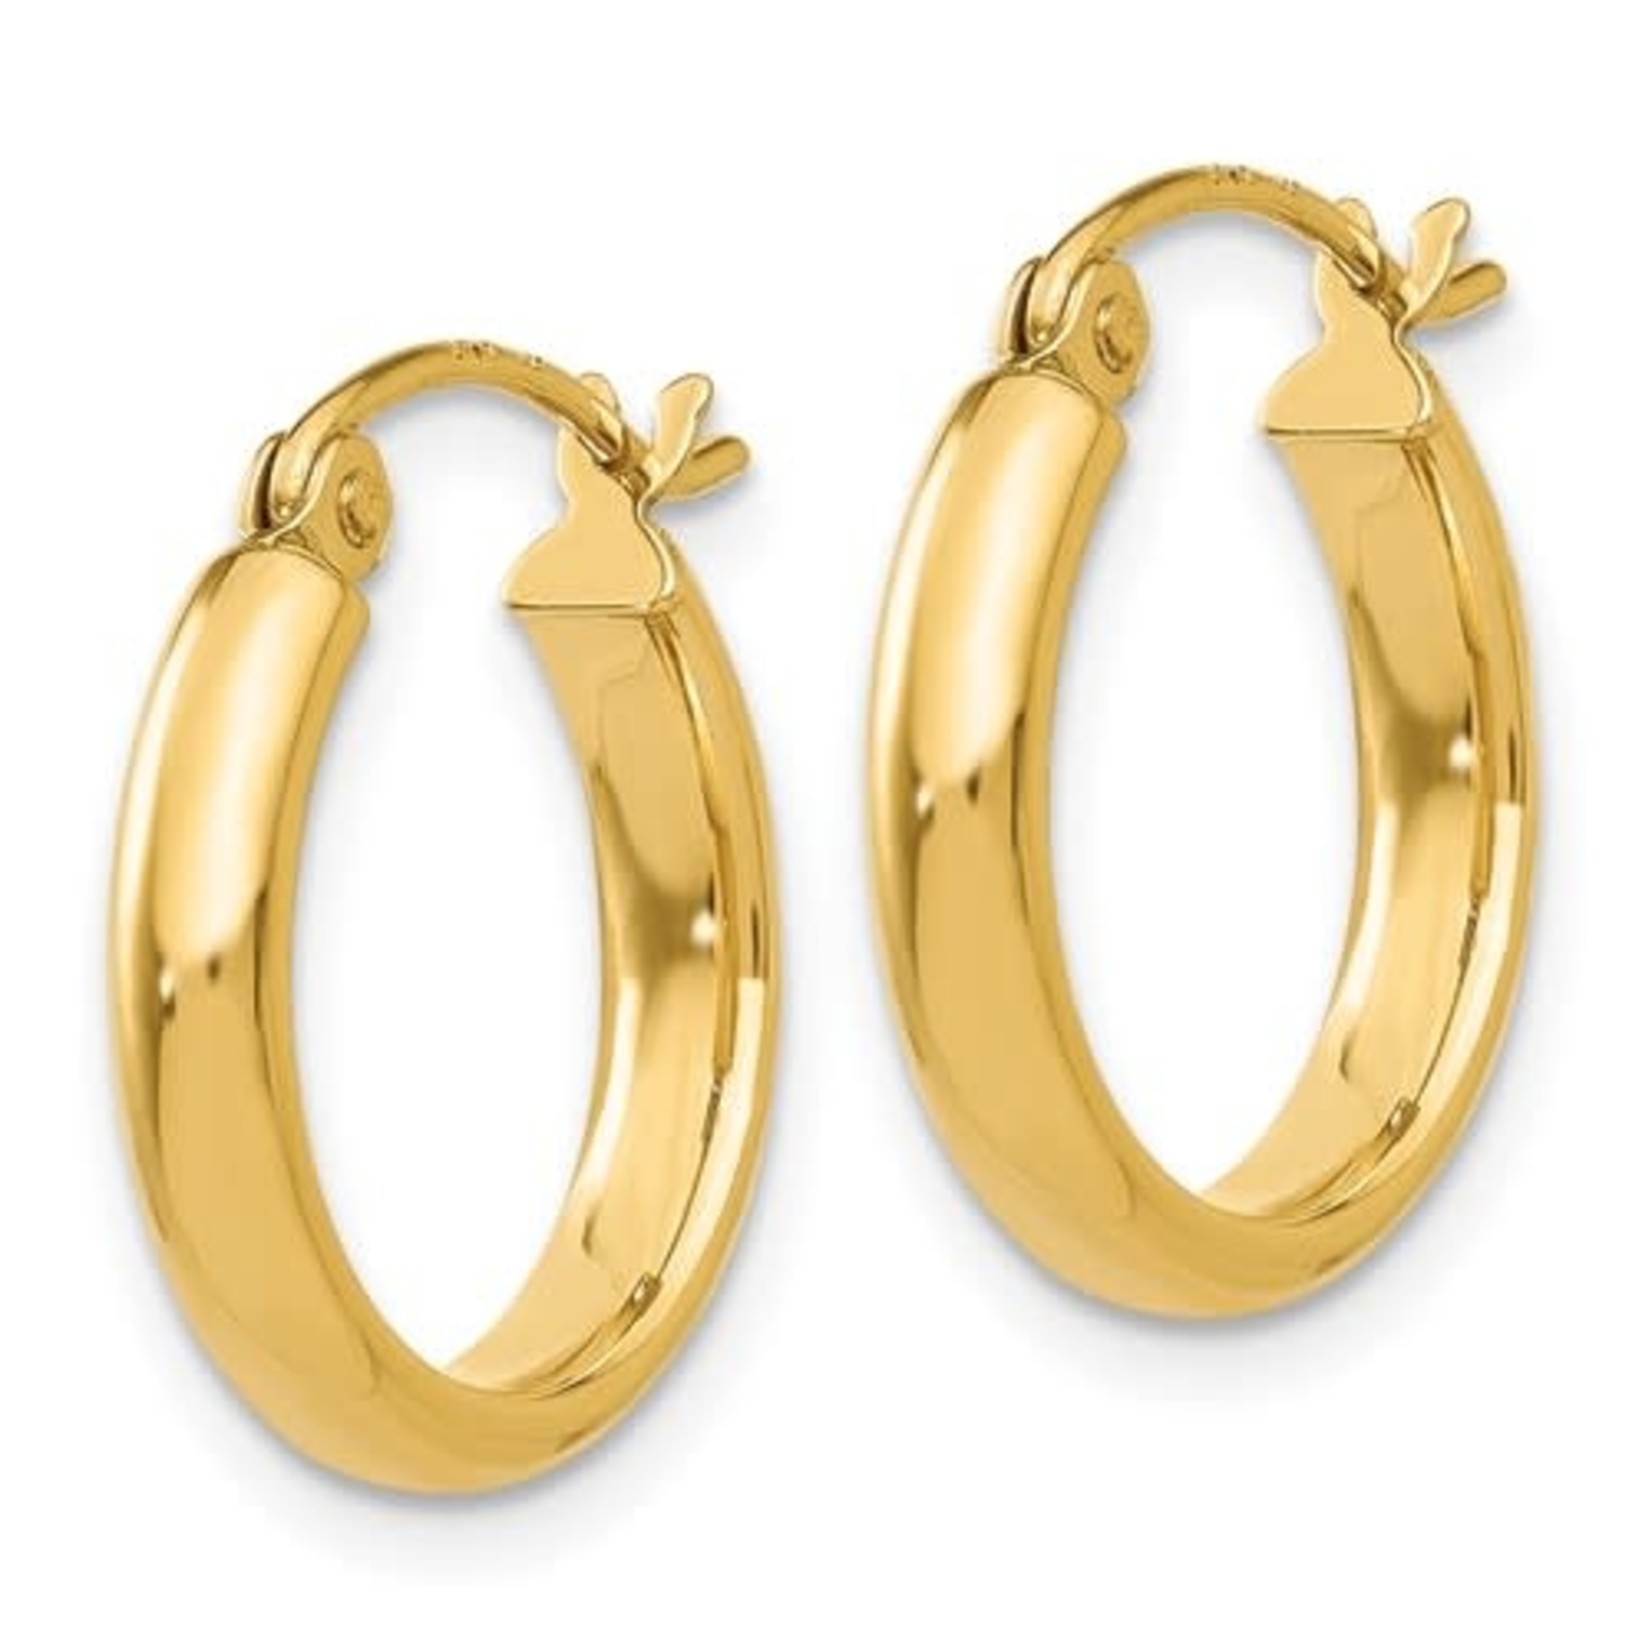 This Is Life 14k Polished 15mm Hoop Earring